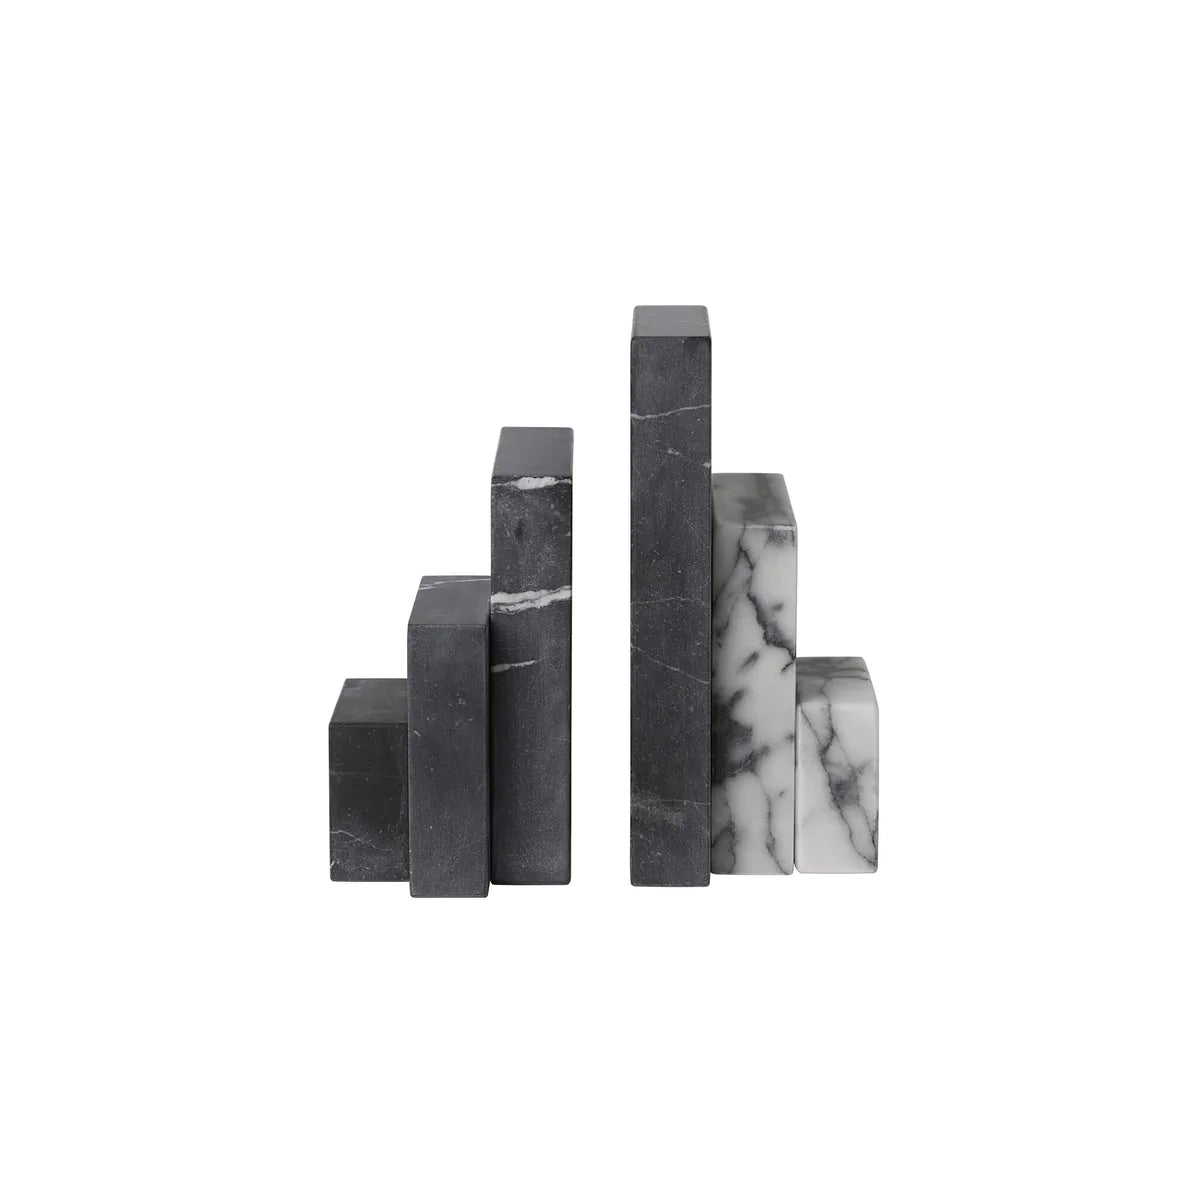 Marble Bookend Sculpture